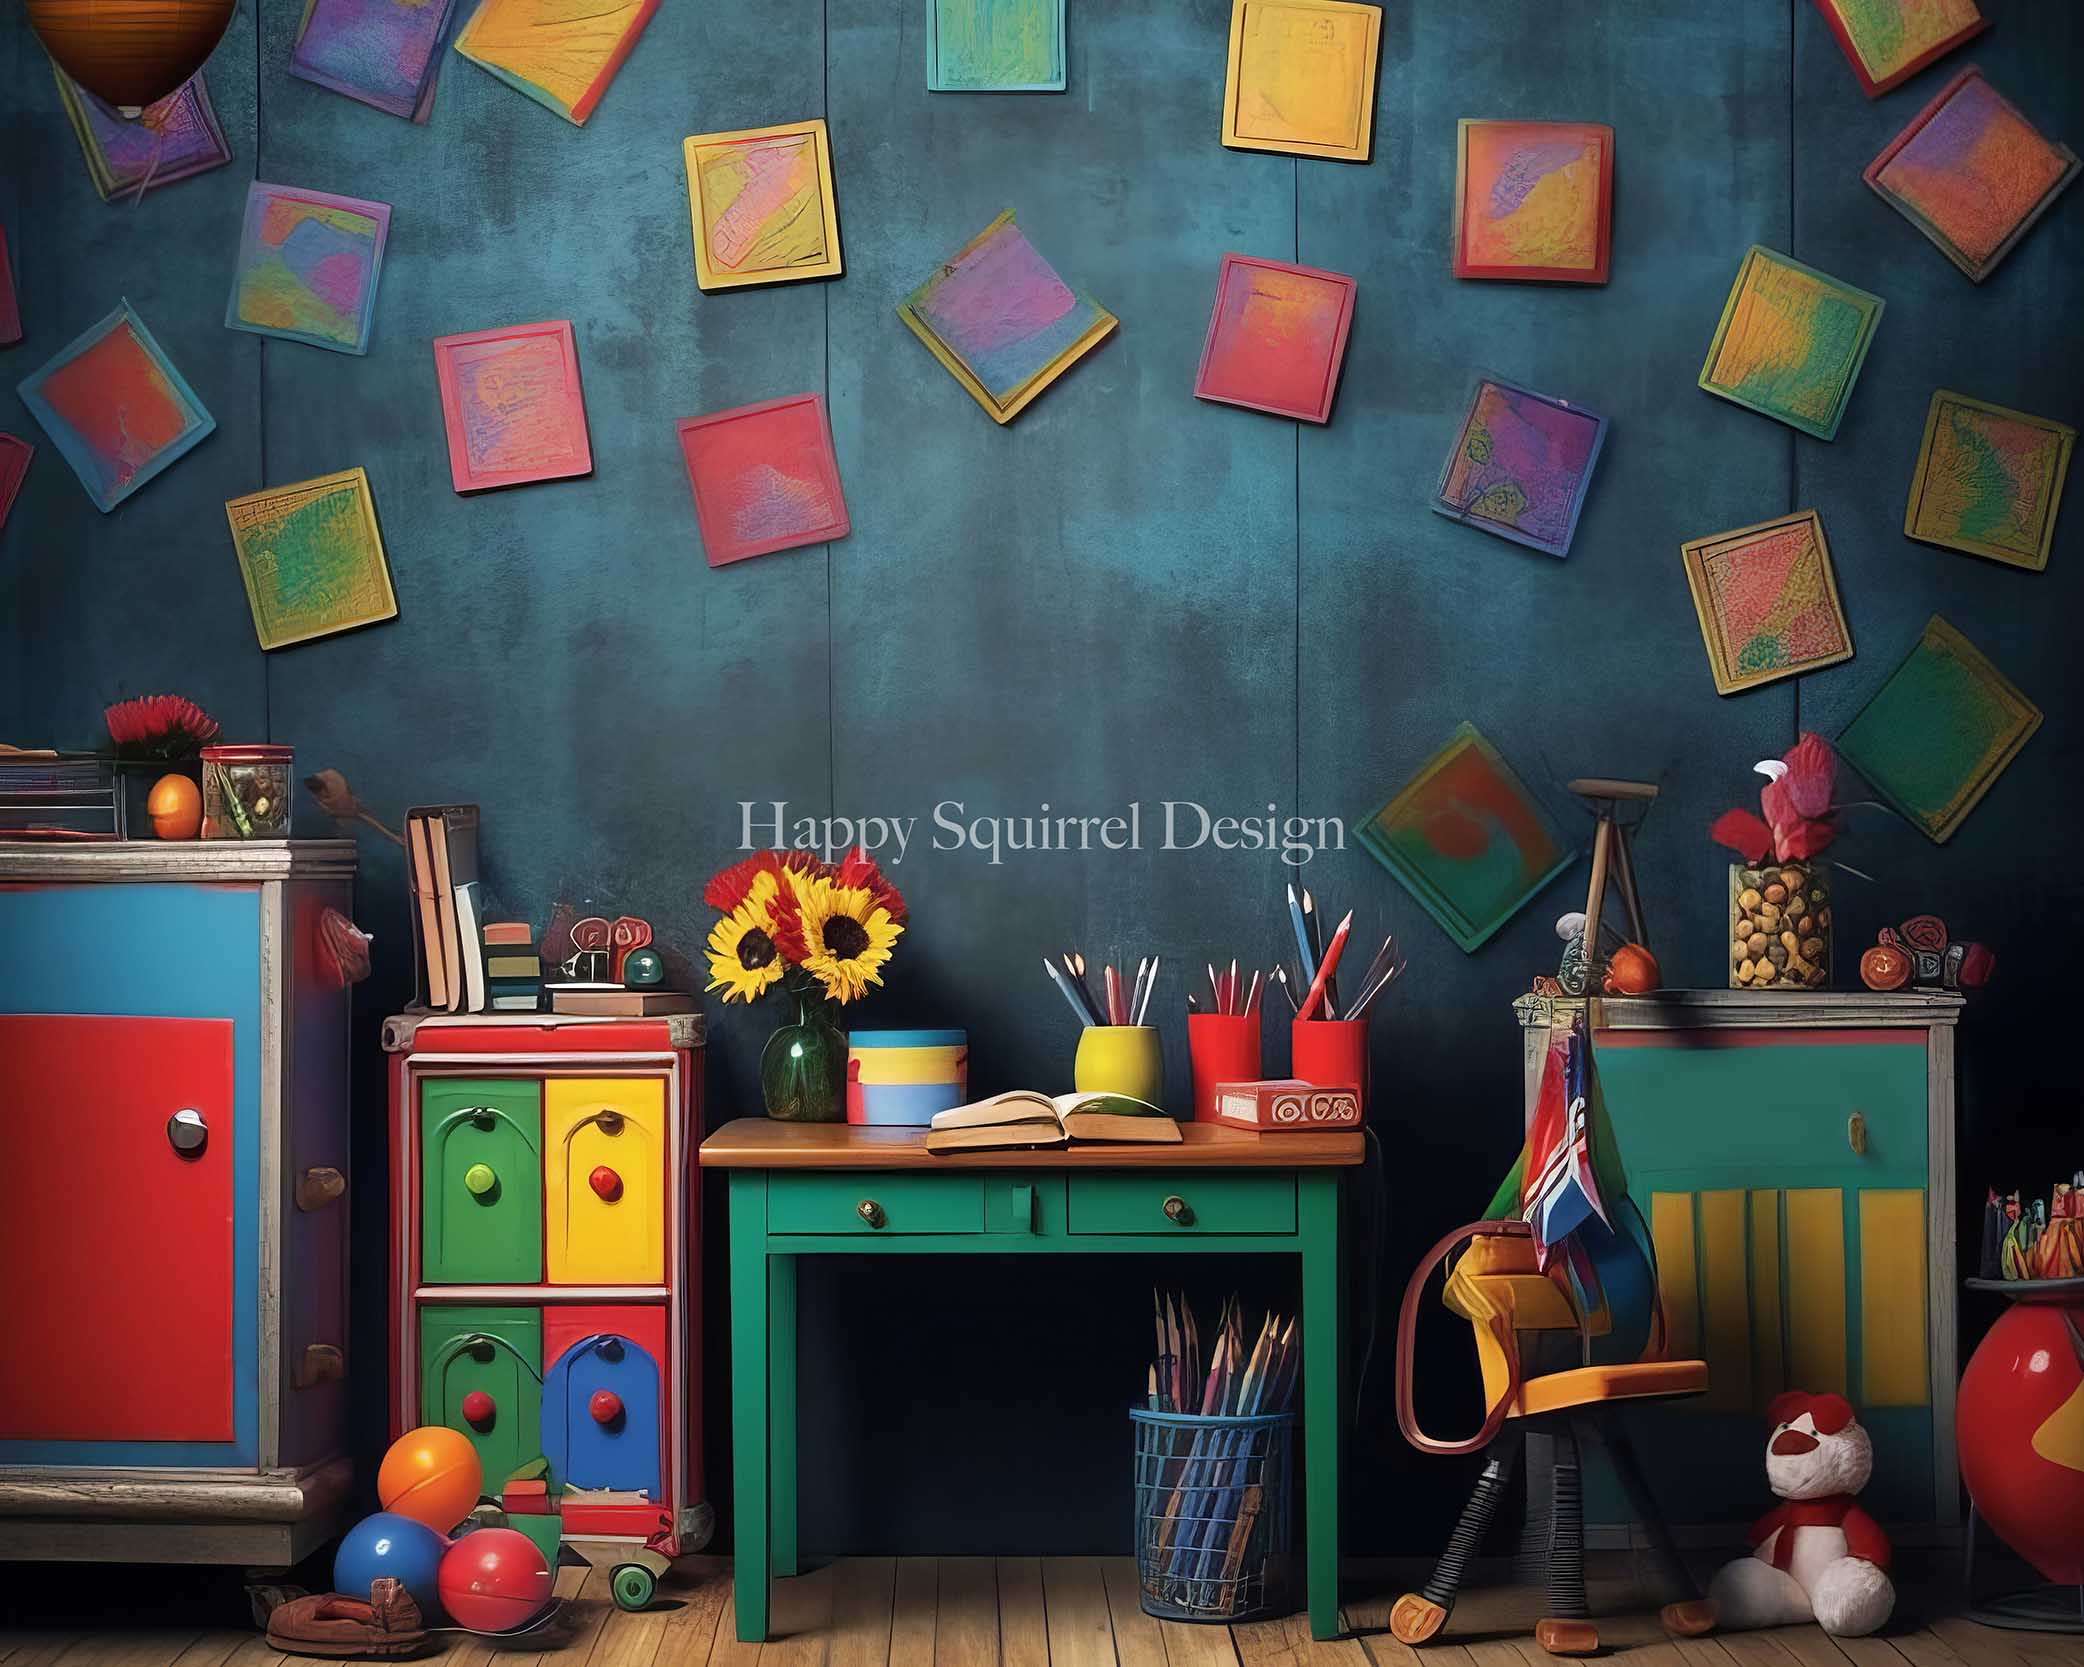 Kate Back to School Colorful Classroom Backdrop Designed by Happy Squirrel Design